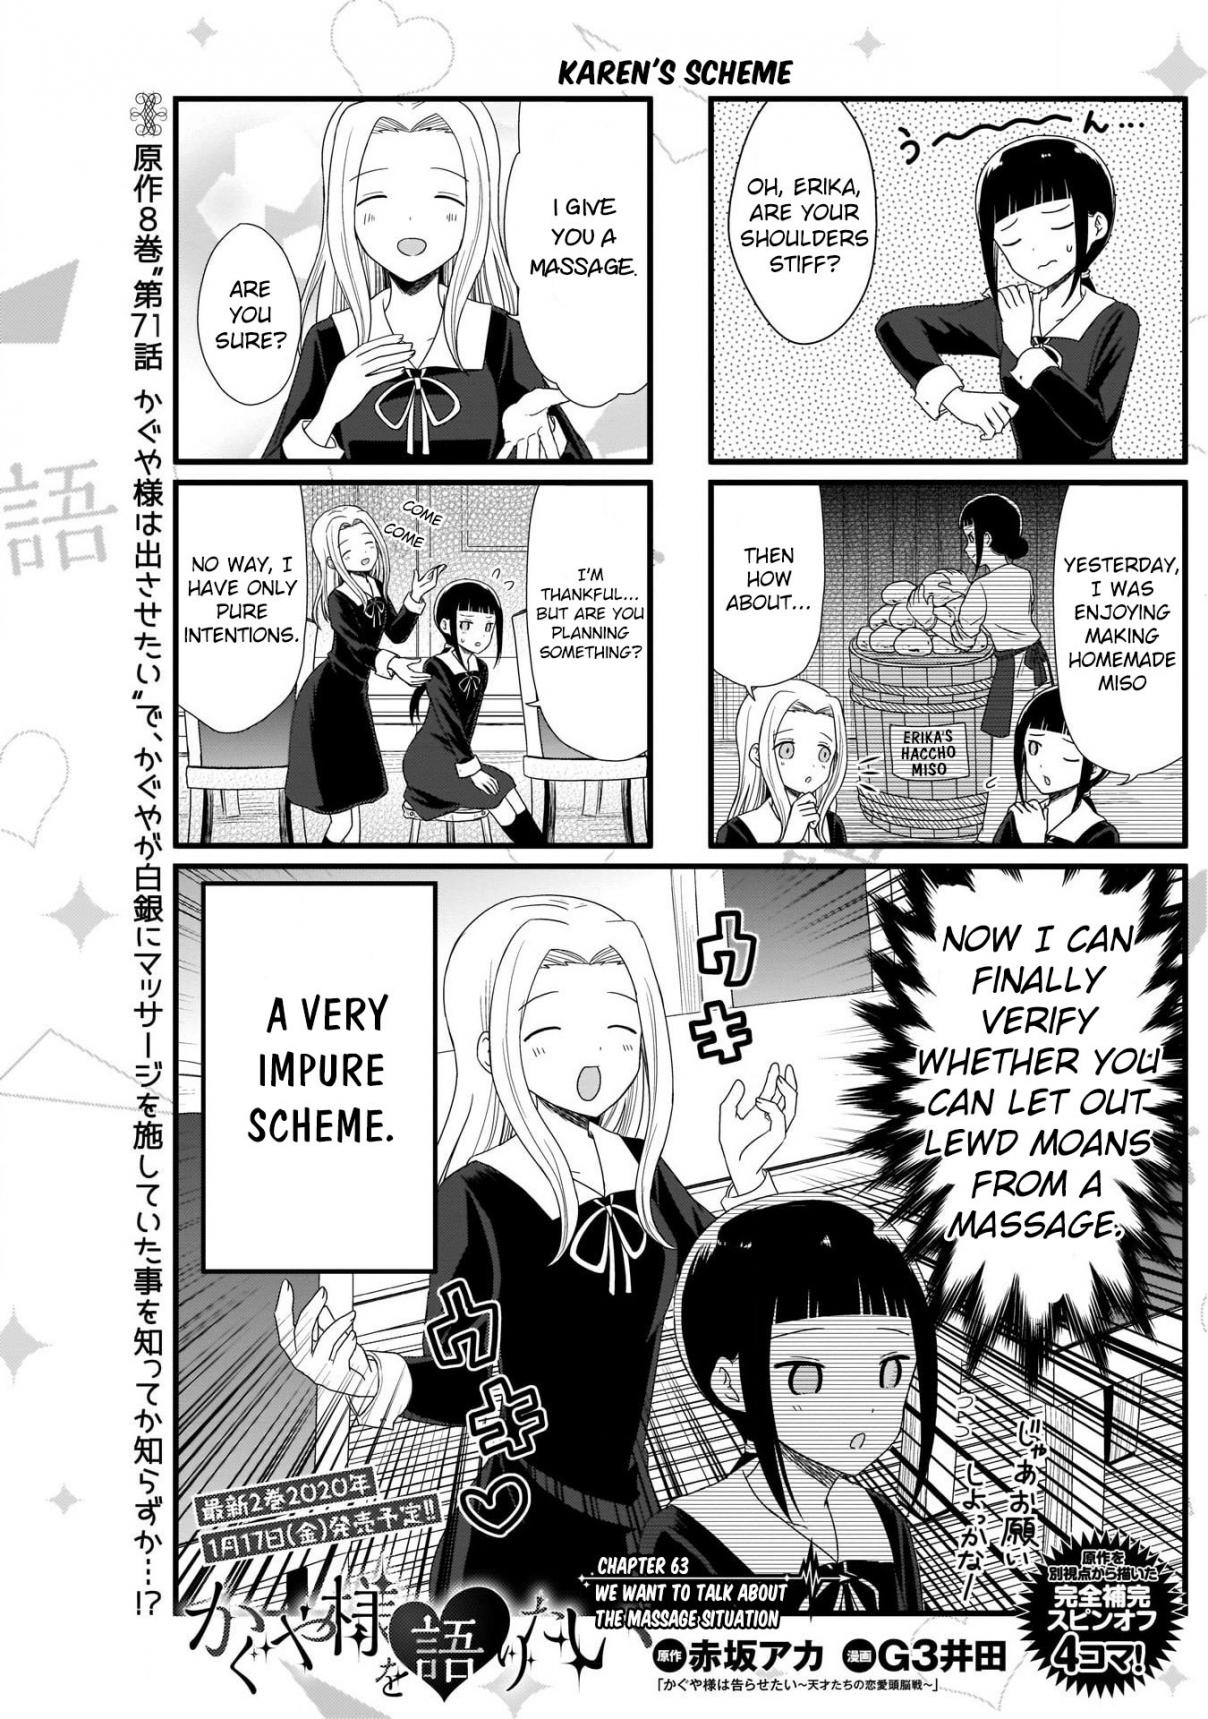 We Want To Talk About Kaguya Ch. 63 We Want to Talk About The Massage Situation